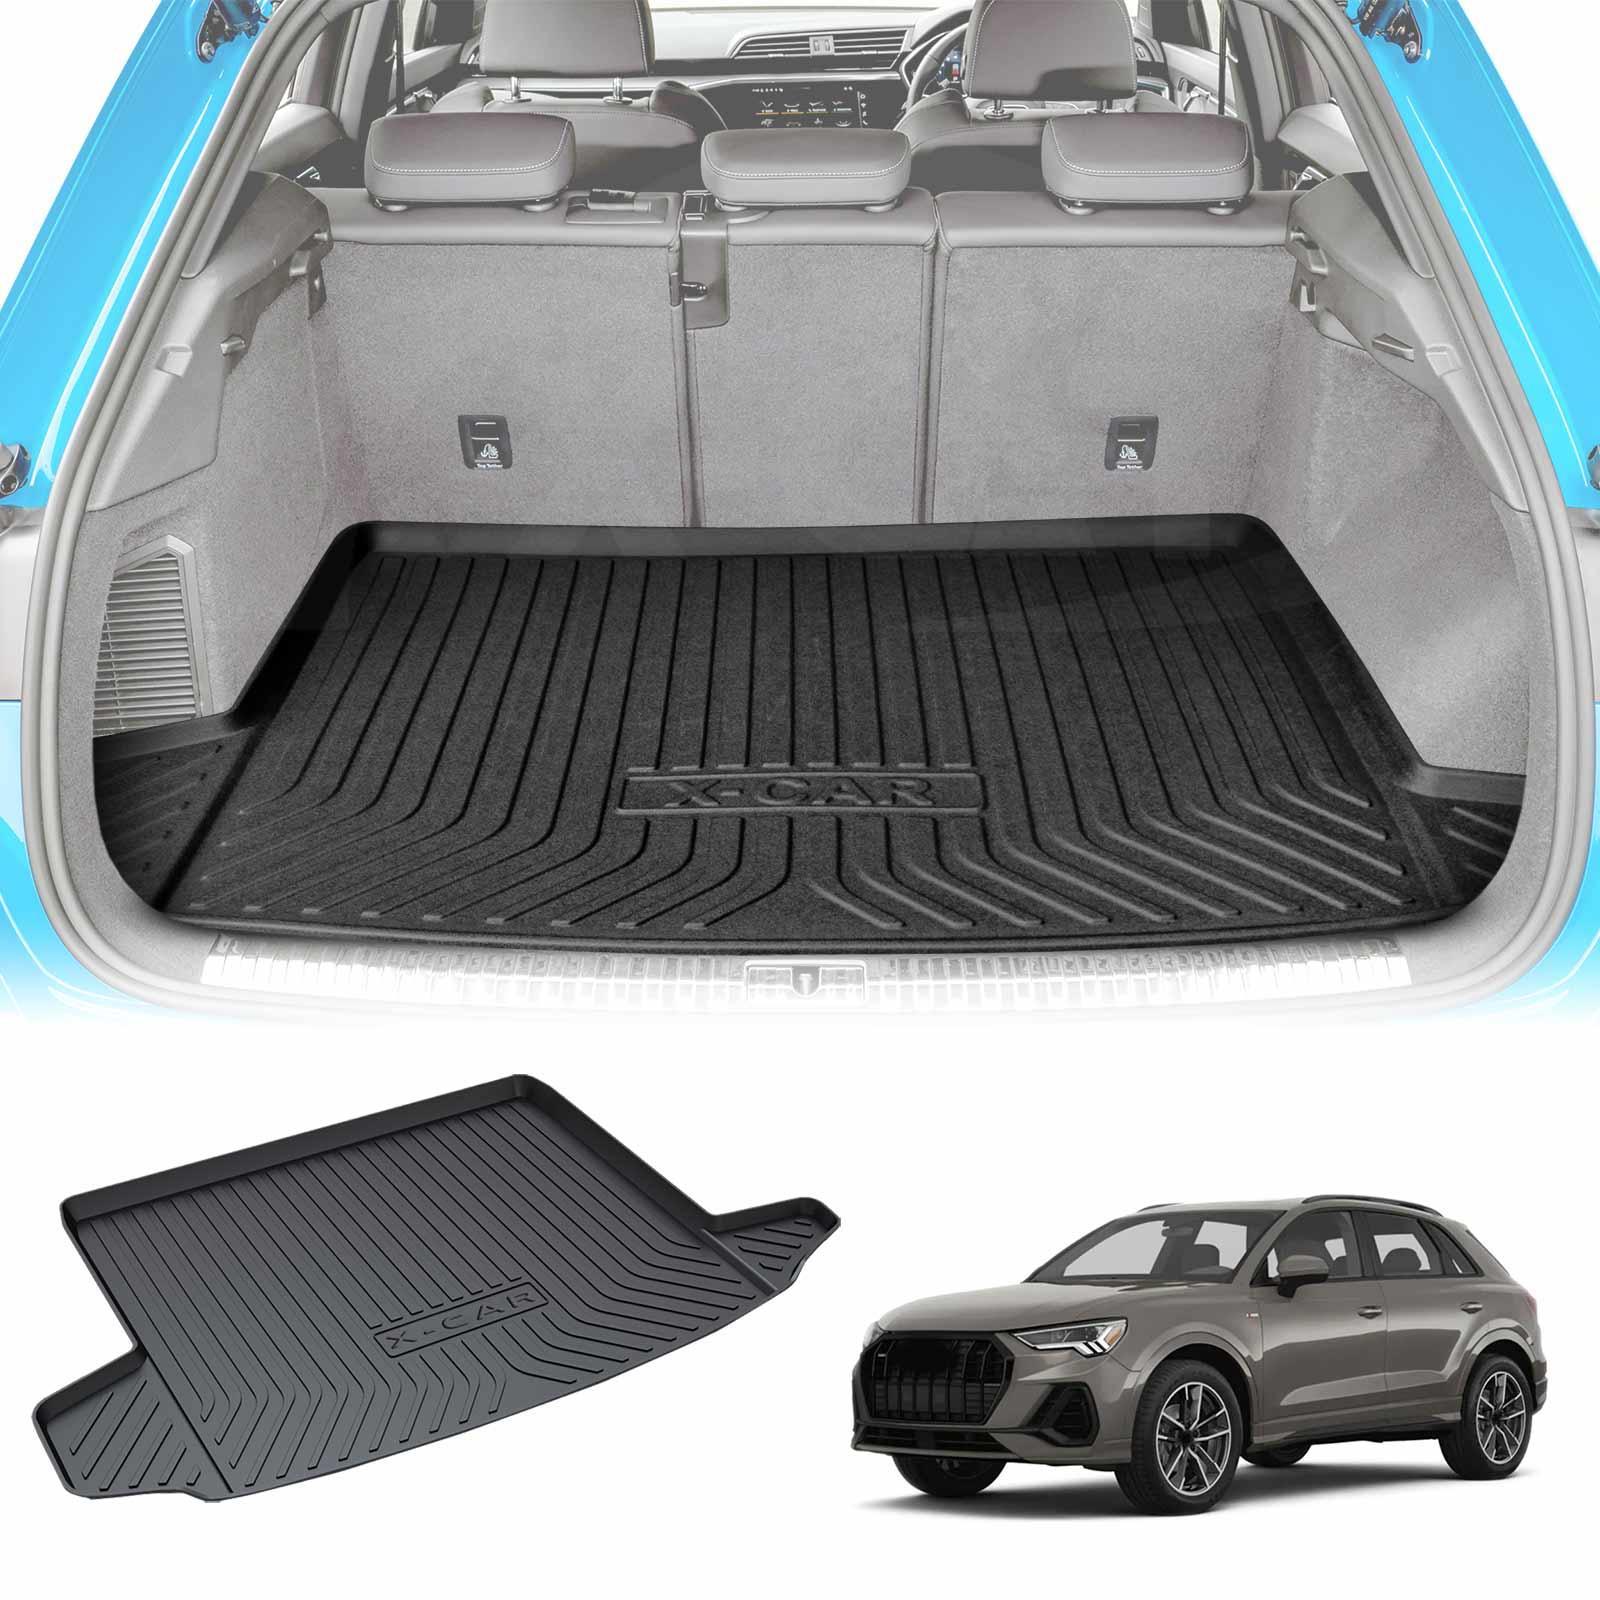 Heavy Duty Trunk Cargo Mat Boot Liner Luggage Tray Fits Audi Q3 RS Q3 2019 2020 2021 2022 2023 2024 SUV